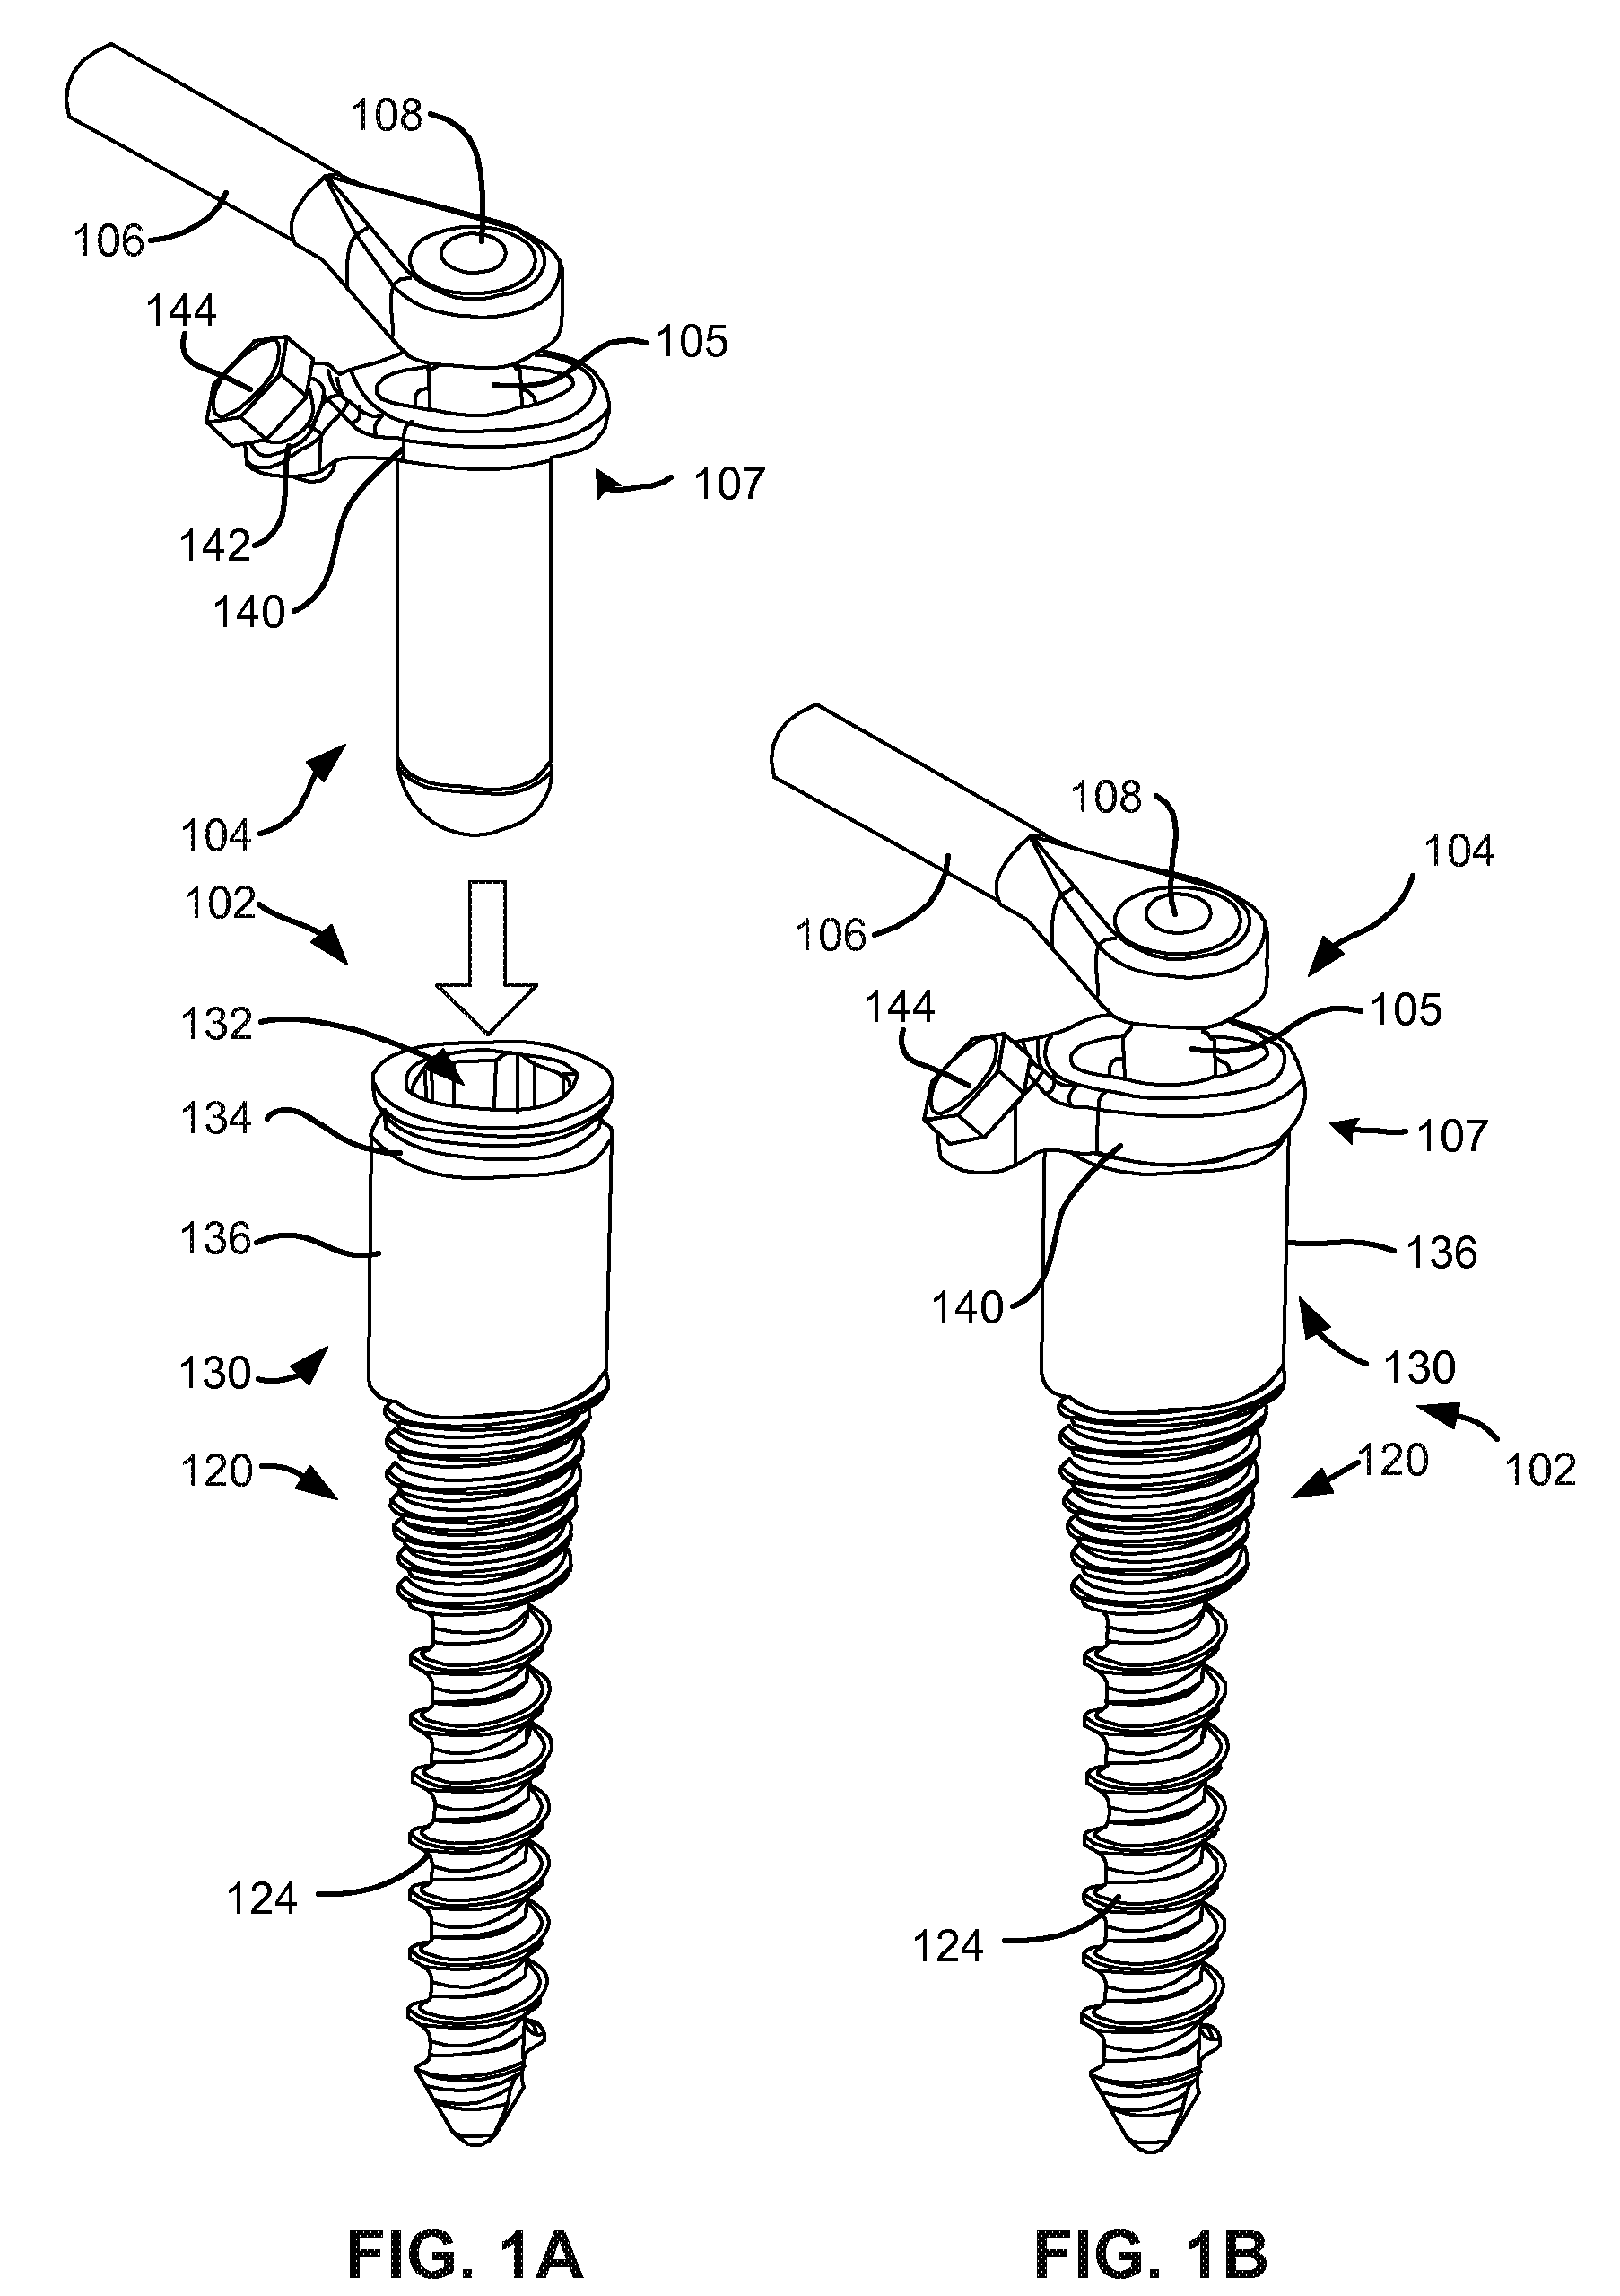 Load-sharing bone anchor having a deflectable post and method for stabilization of the spine